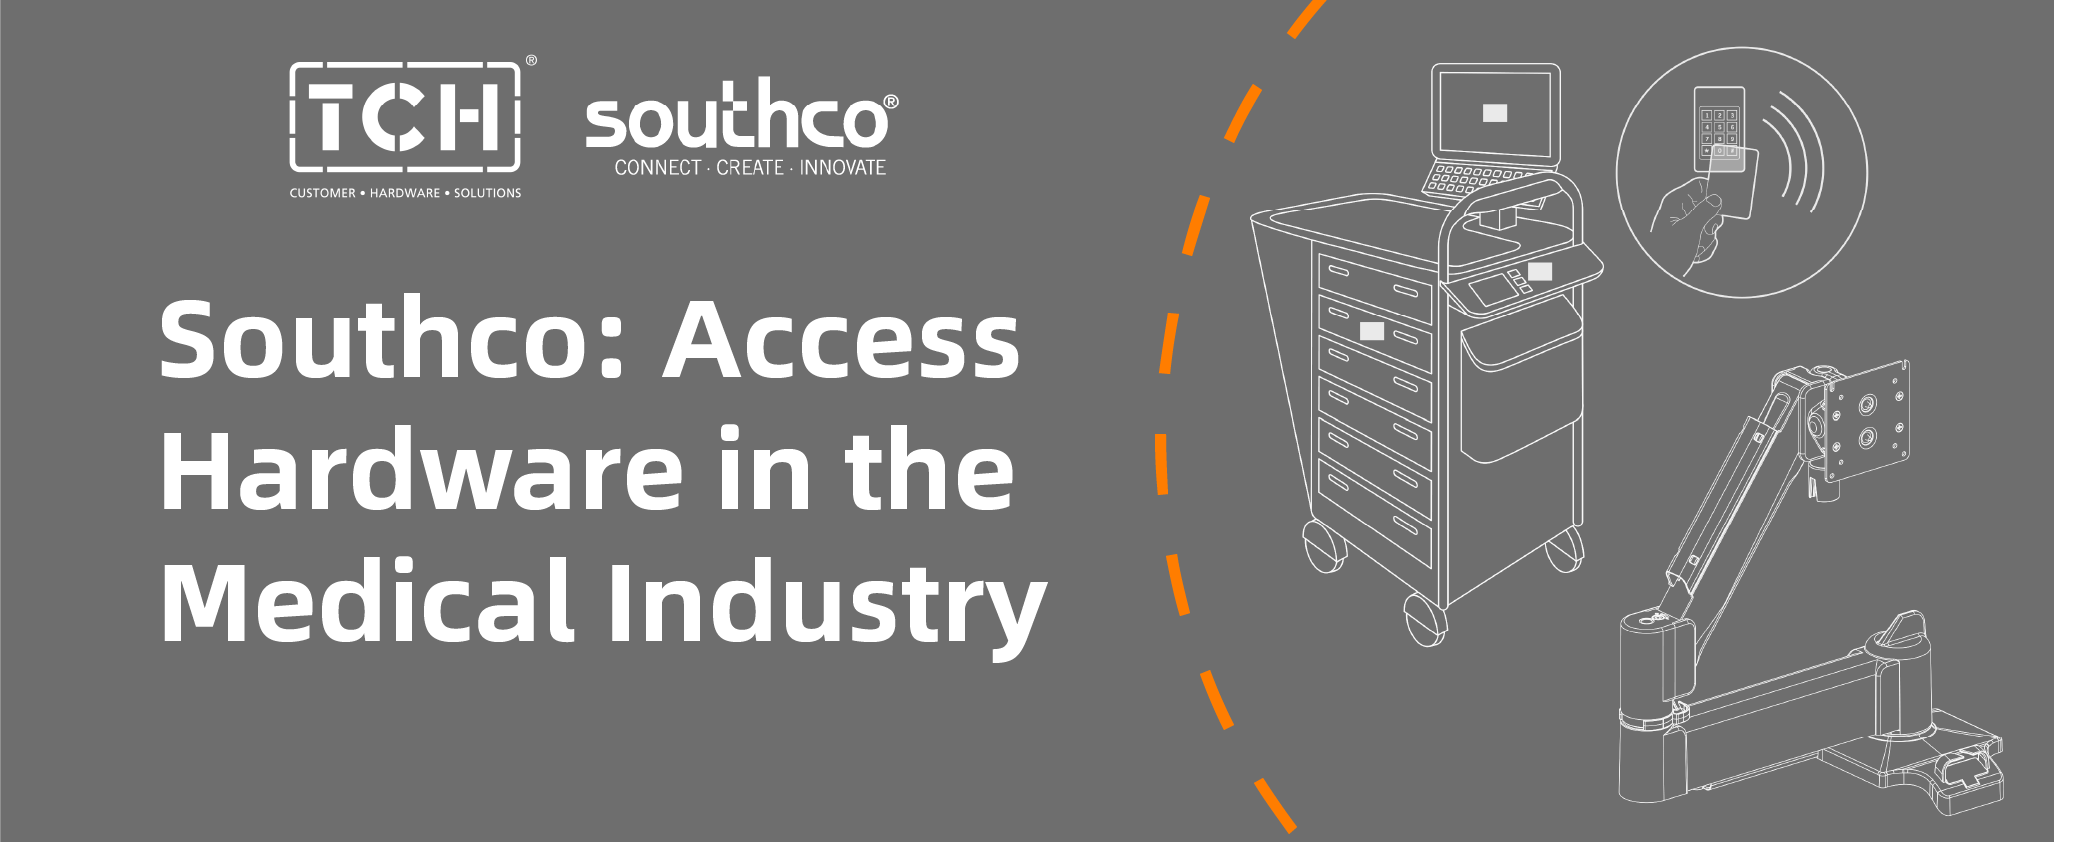 Southco: Access Hardware in the Medical Industry